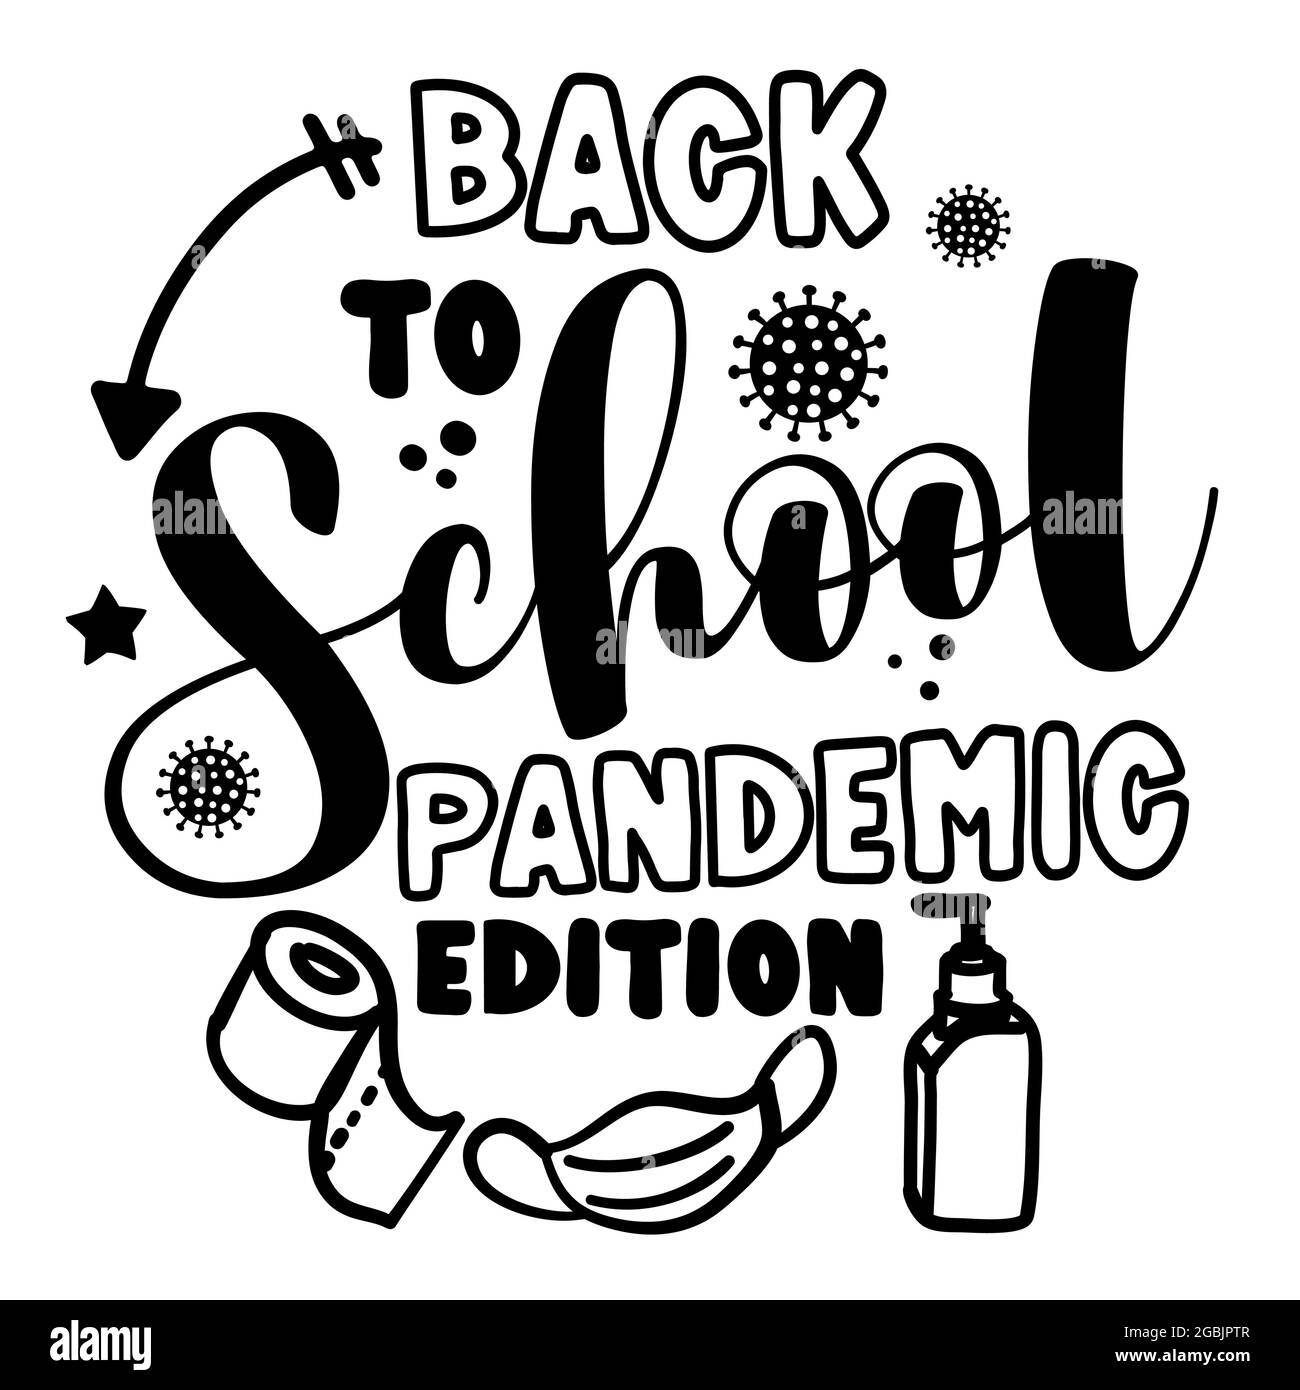 Back to School, pandemic edition (quarantine coronavirus) - Online school learning poster with text for self quarantine. Hand letter script motivation Stock Vector